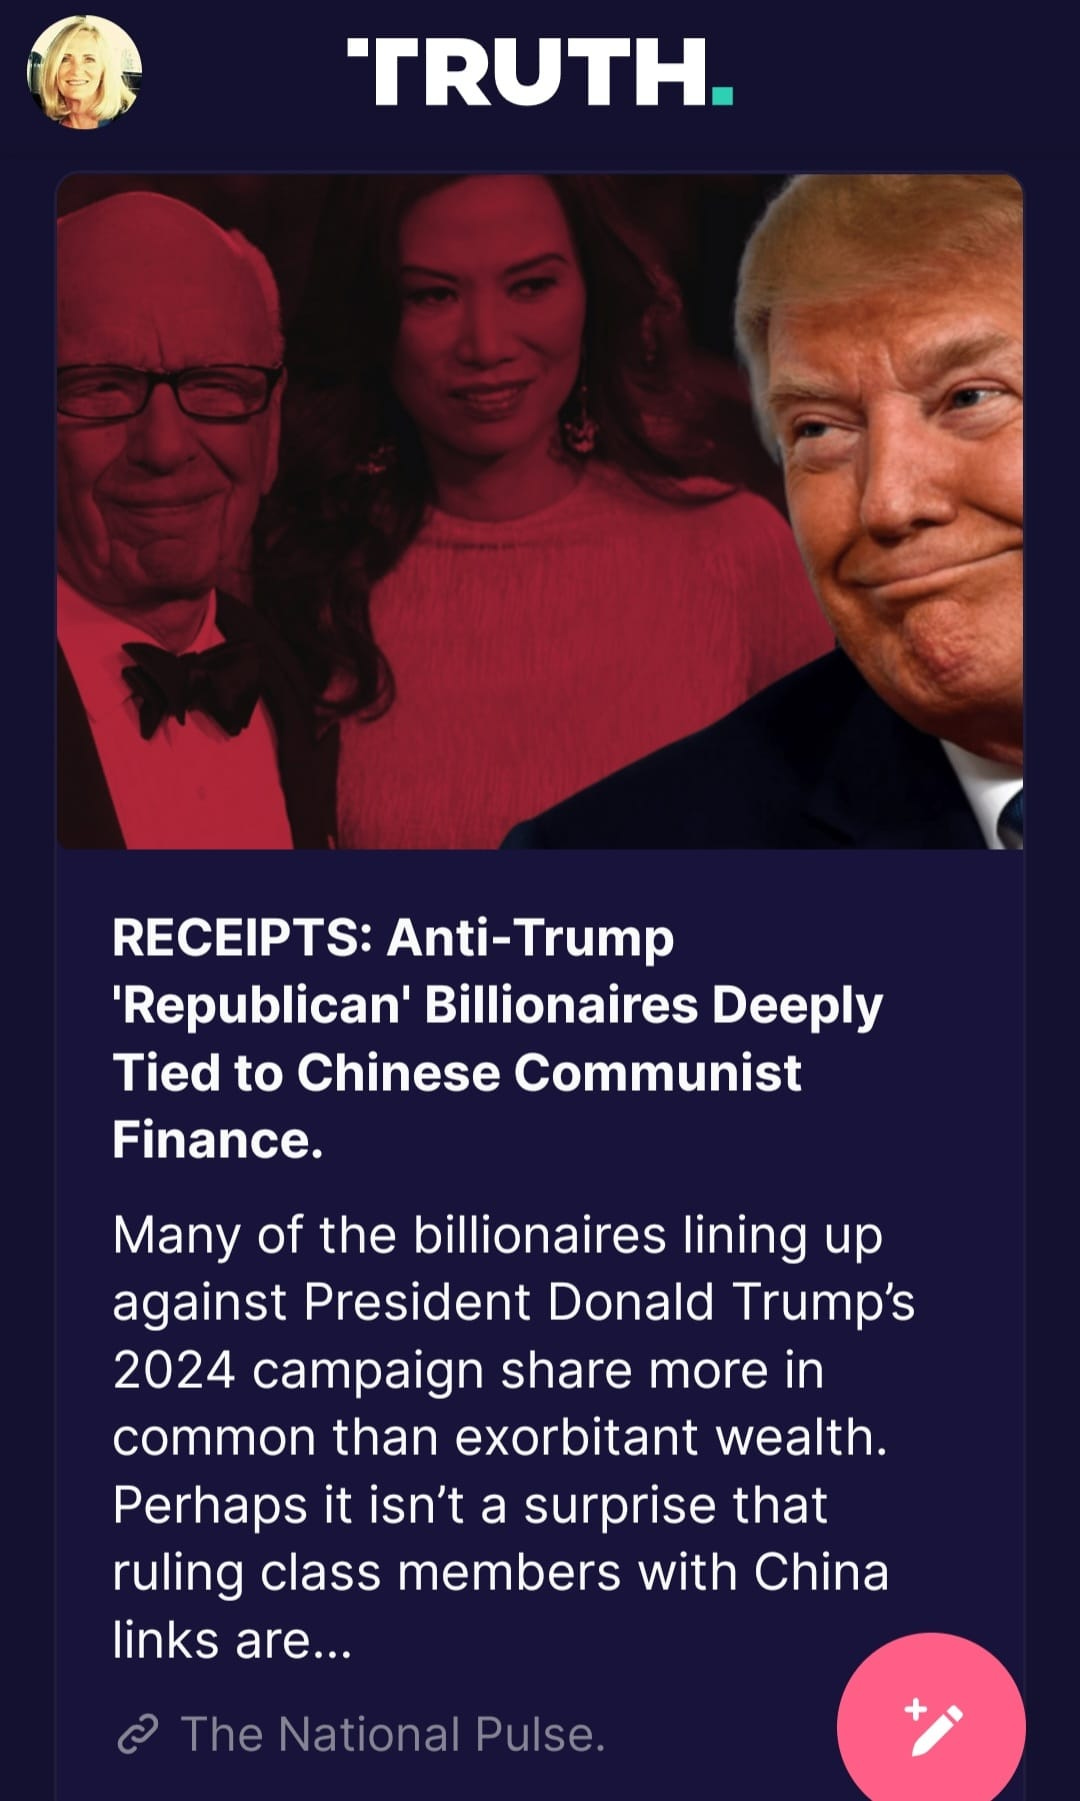 May be an image of 3 people and text that says 'TRUTH. RECEIPTS Anti-Trump 'Republican' Billionaires Deeply Tied to Chinese Communist Finance. Many of the billionaires lining up against President Donald Trump's 2024 campaign share more in common than exorbitant wealth. Perhaps it isn't a surprise that ruling class members with China links are... are The National Pulse.'